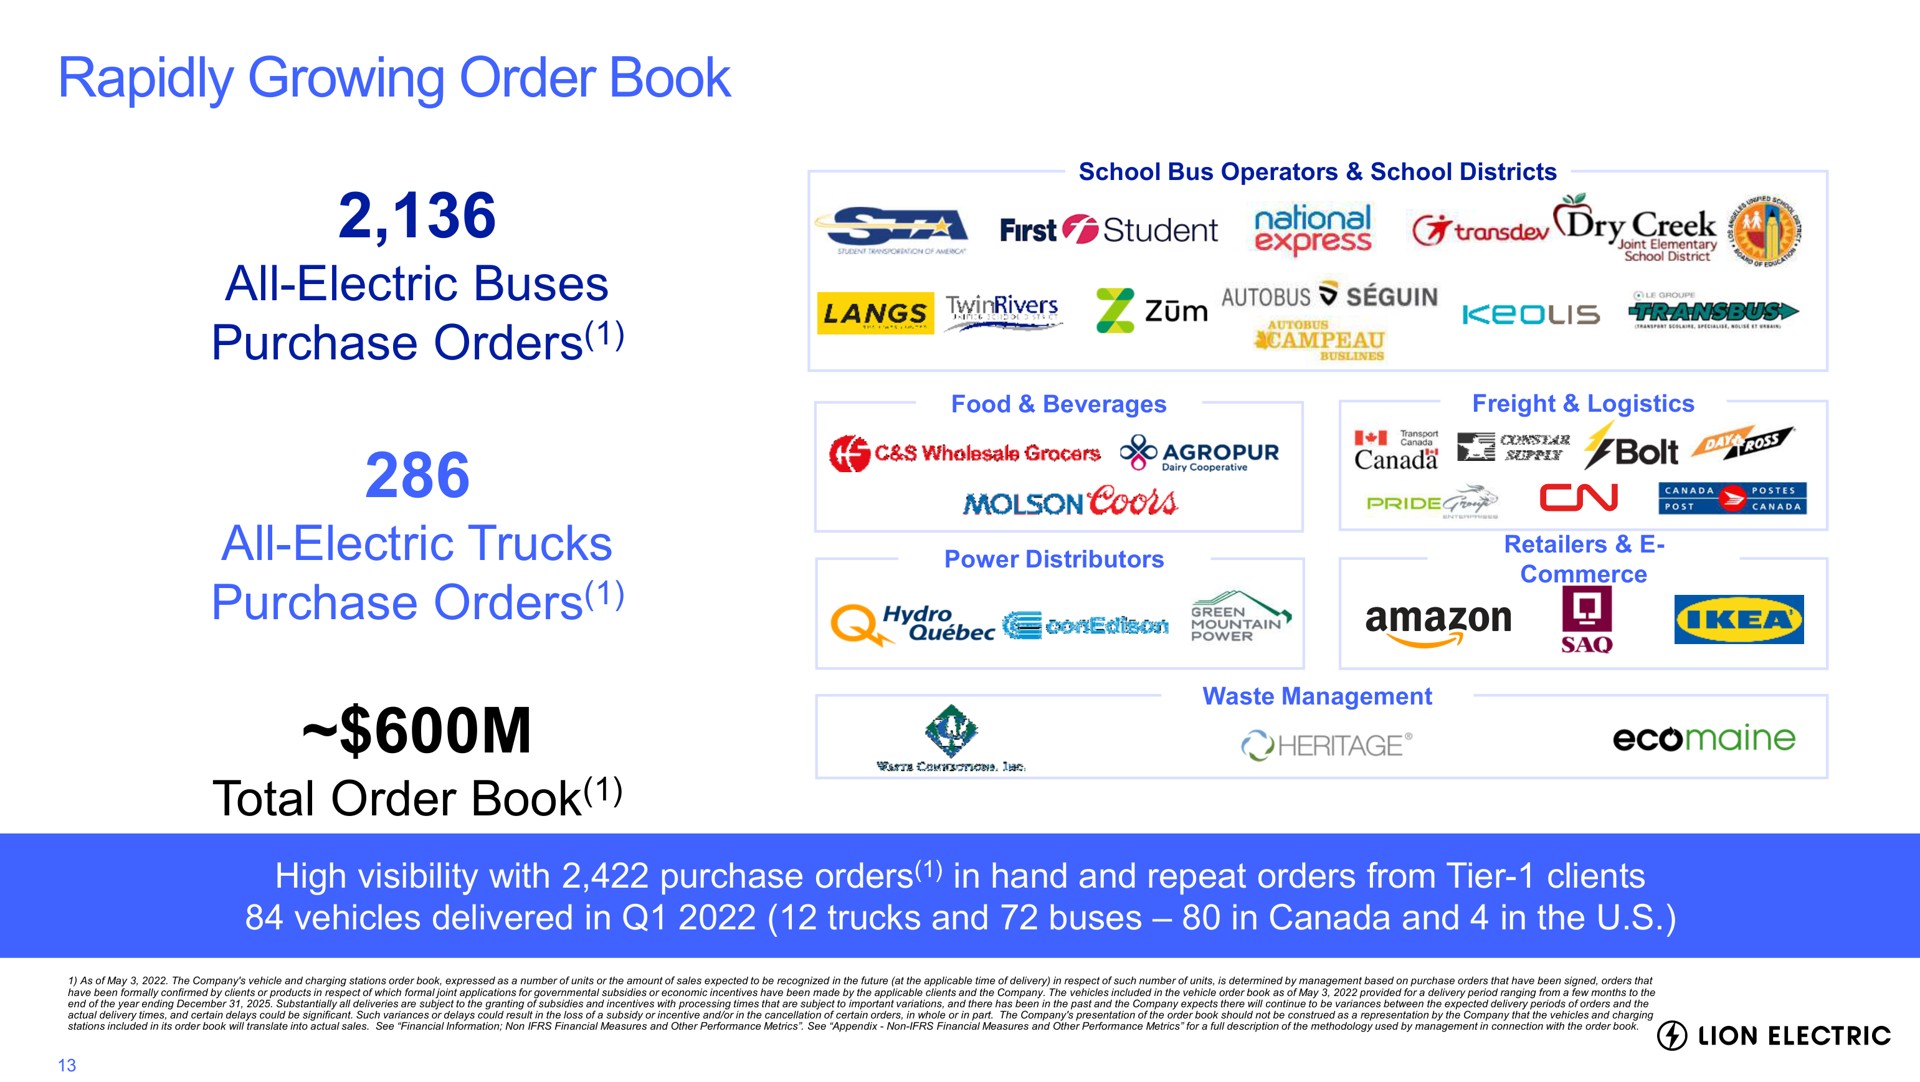 rapidly growing order book all electric buses purchase orders all electric trucks purchase orders total order book high visibility with purchase orders in hand and repeat orders from tier clients vehicles delivered in trucks and buses in canada and in the first student noes wholesale grocers of coots prince coheritage | Lion Electric